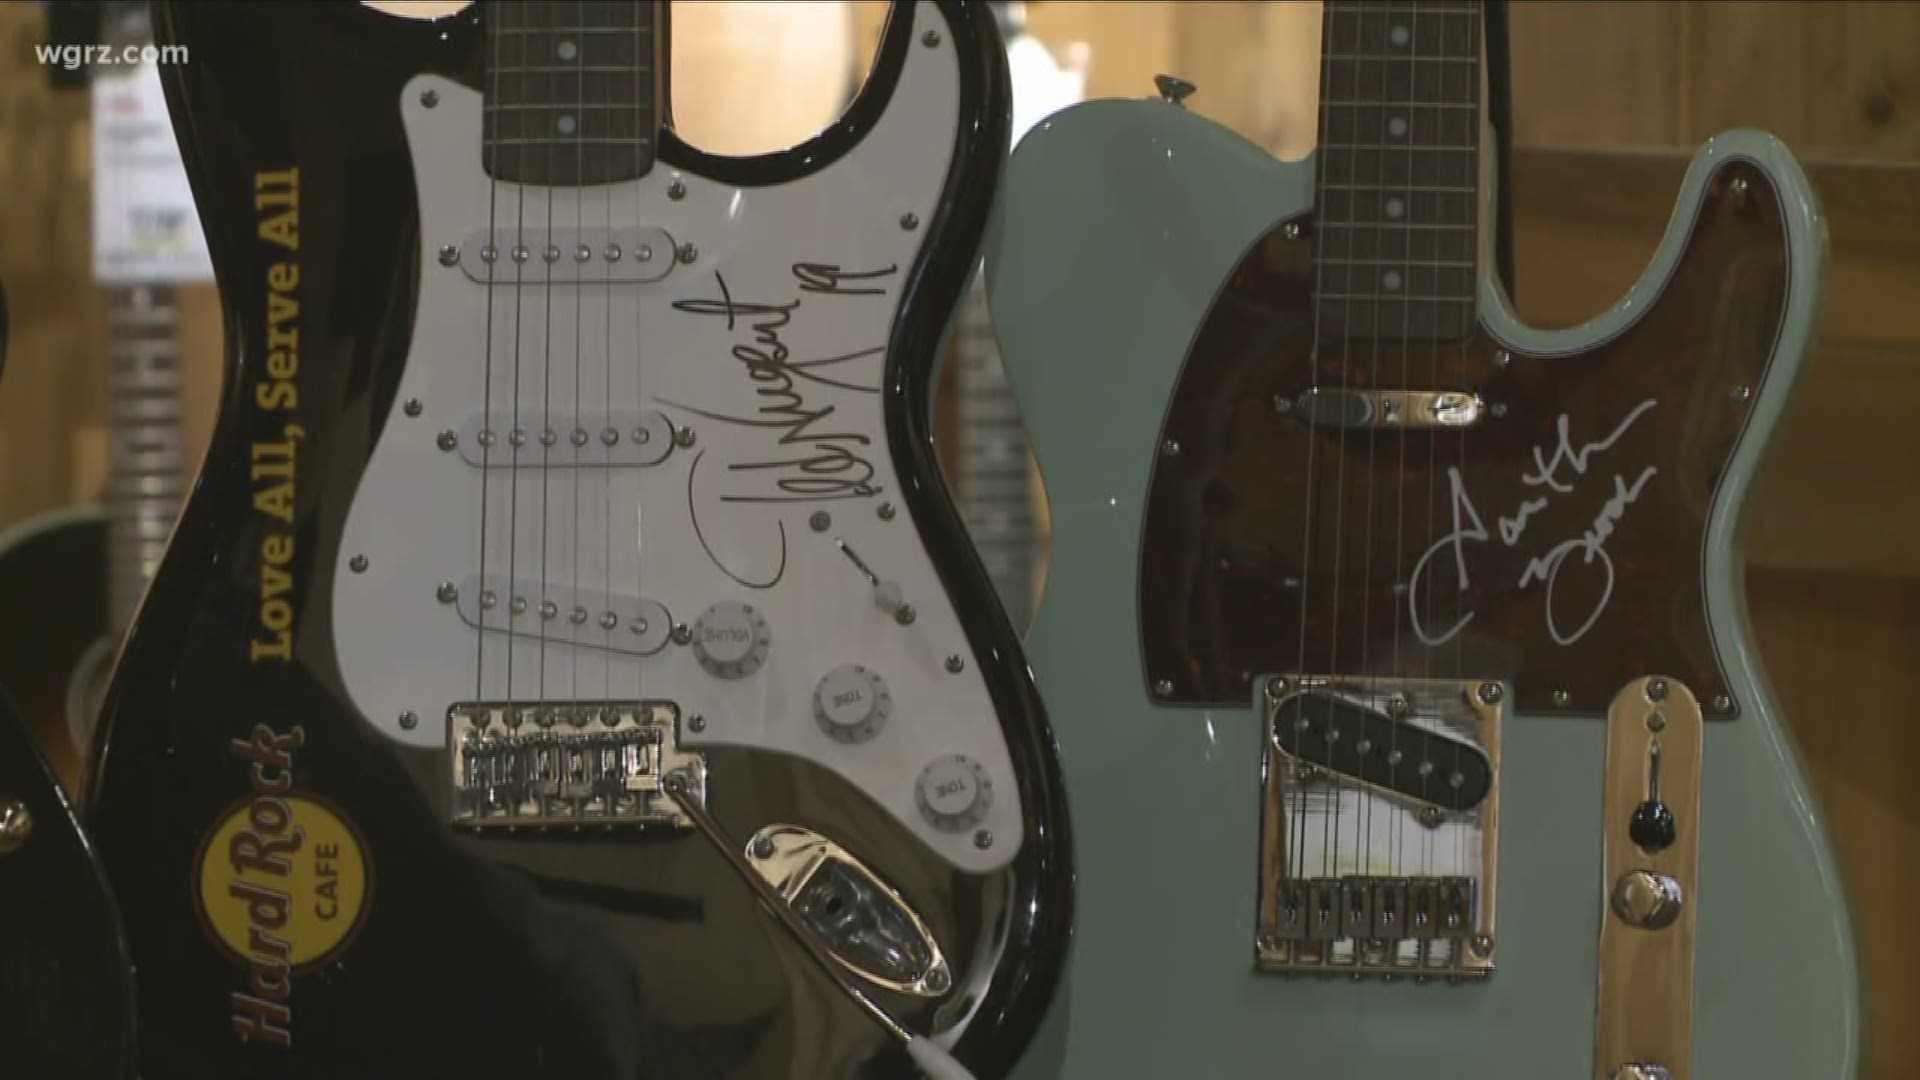 THE GUITARS ARE SIGNED BY MUSIC LEGENDS LIKE SLASH, OZZY OSBOURNE, GARTH BROOKS, AND QUEEN.